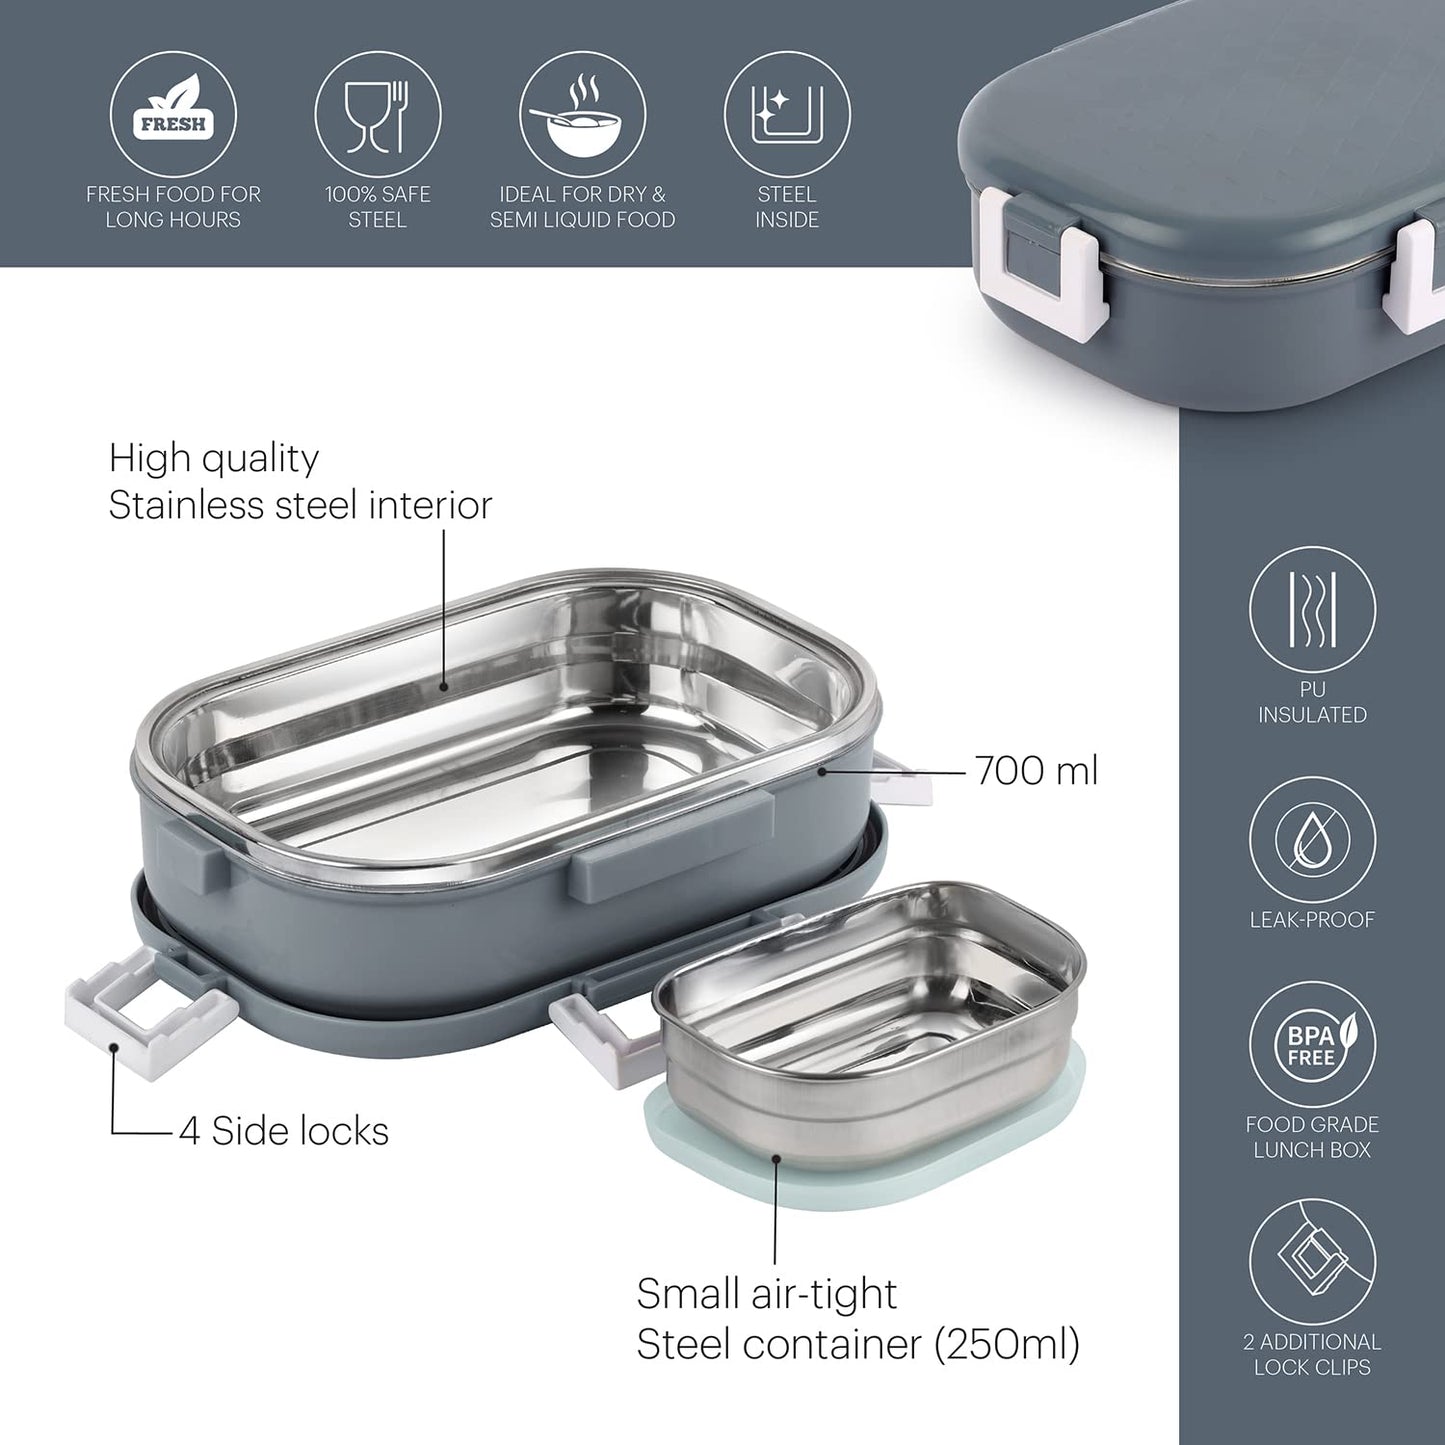 CELLO Altro Neo Lunch Box, Neo Grey, 700ml | 2 Units Insulated Lunch Boxes |Stainless Steel Lunch Box for Kids | Leak-Proof Snacks Tiffin Box for School